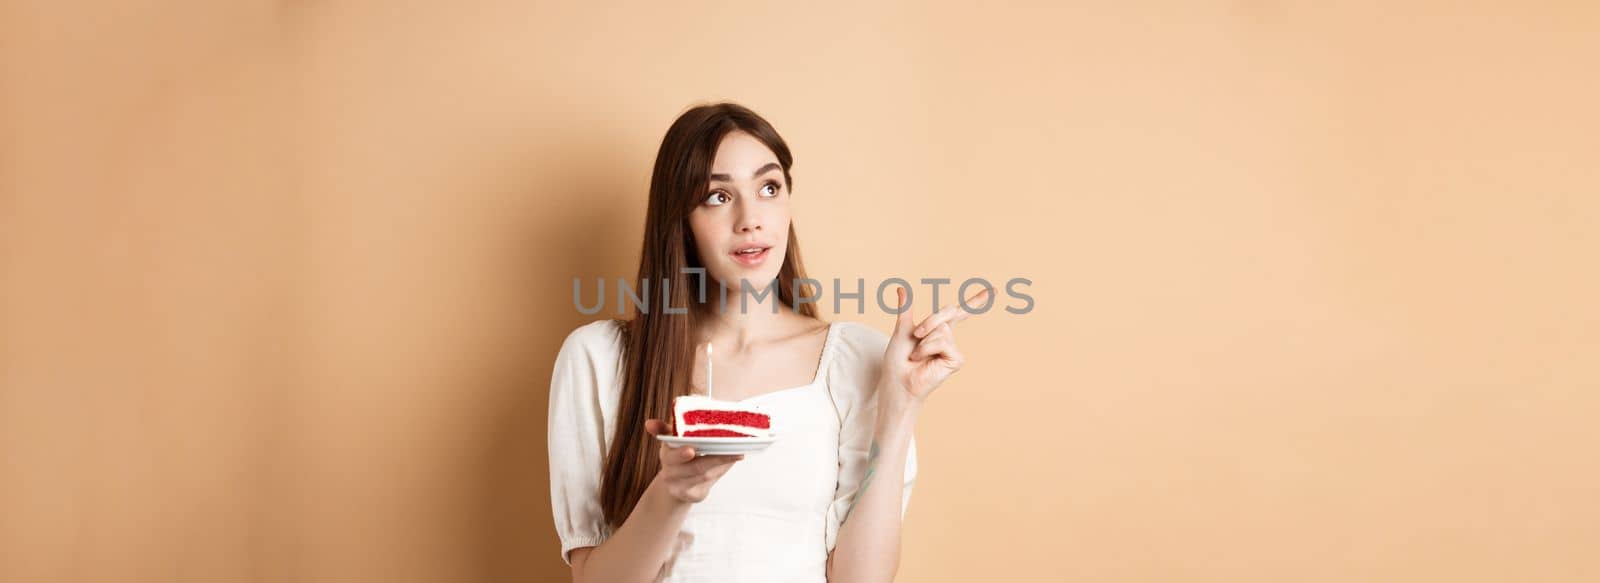 Thoughtful birthday girl holding cake with candle, thinking of wish and pointing left at logo, standing on beige background.